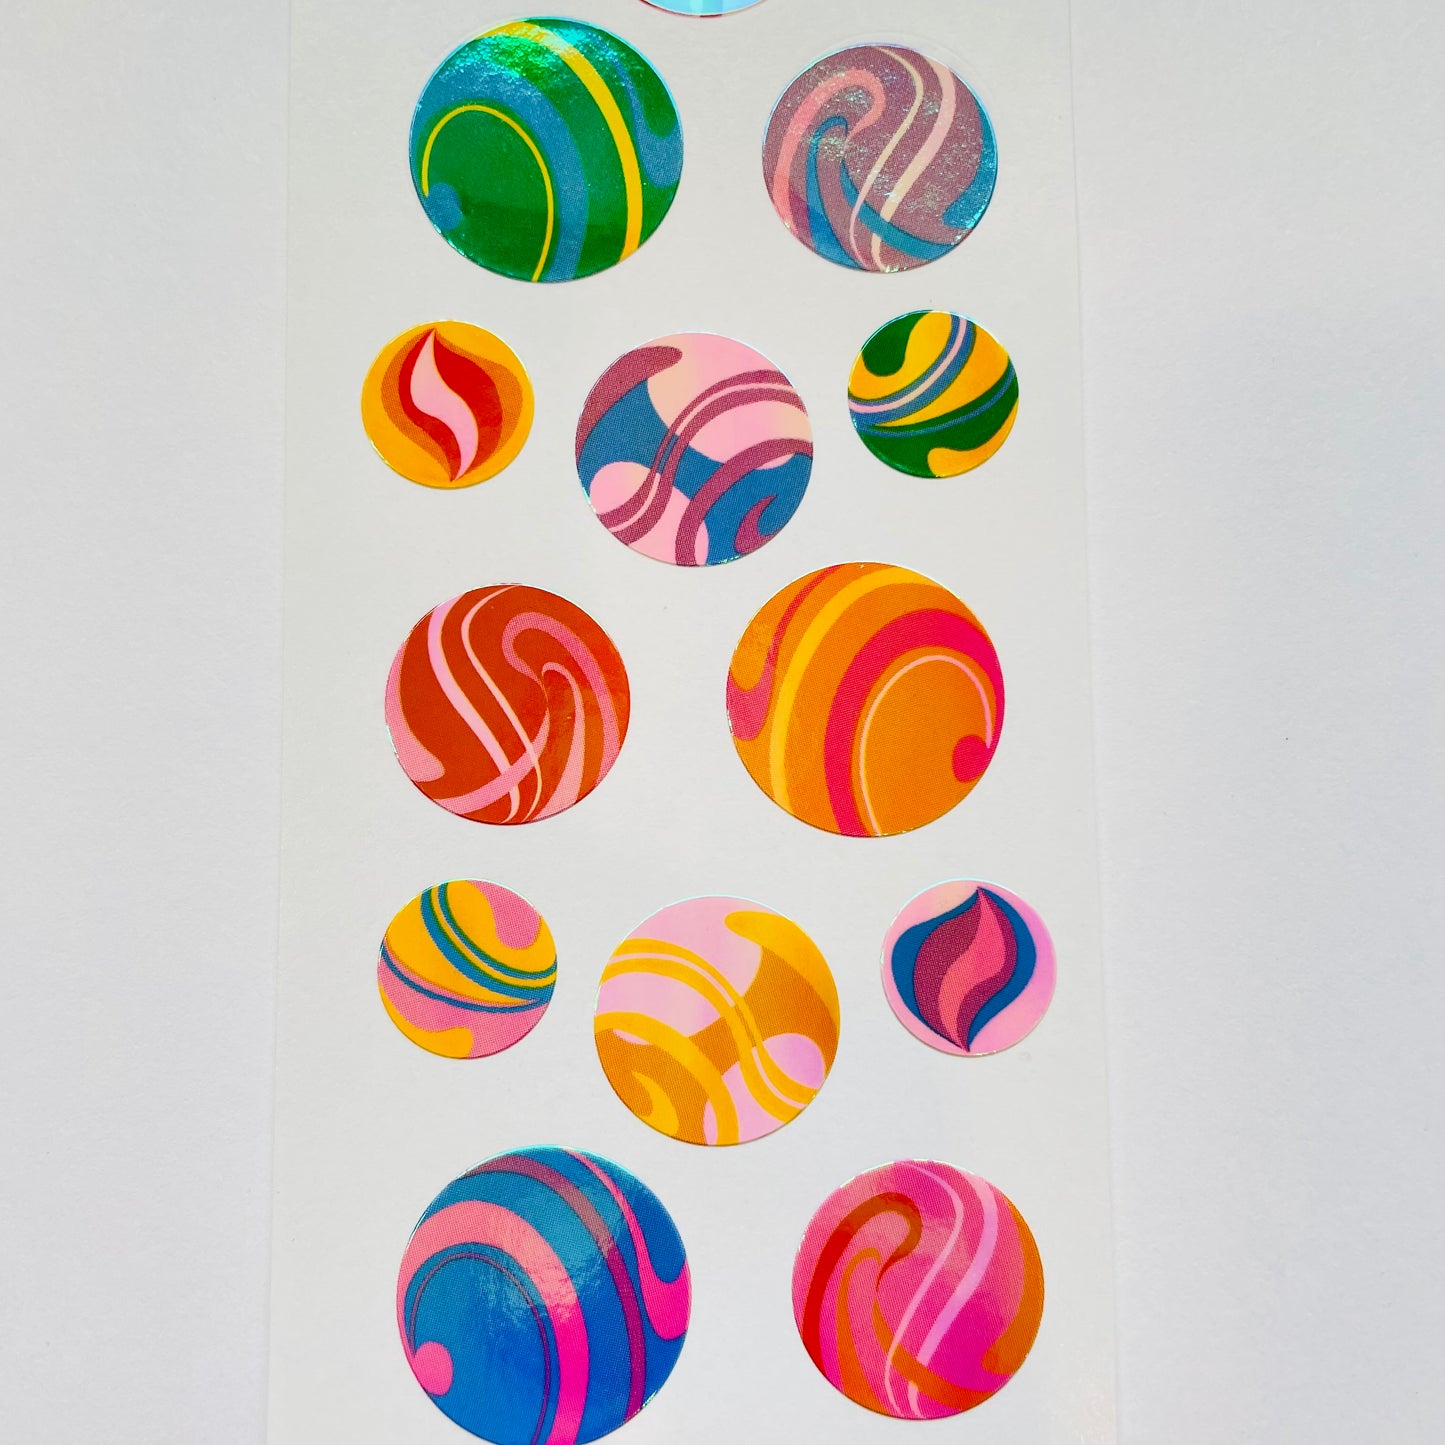 Mrs. Grossman's: Opal Marbles Stickers - New in Package